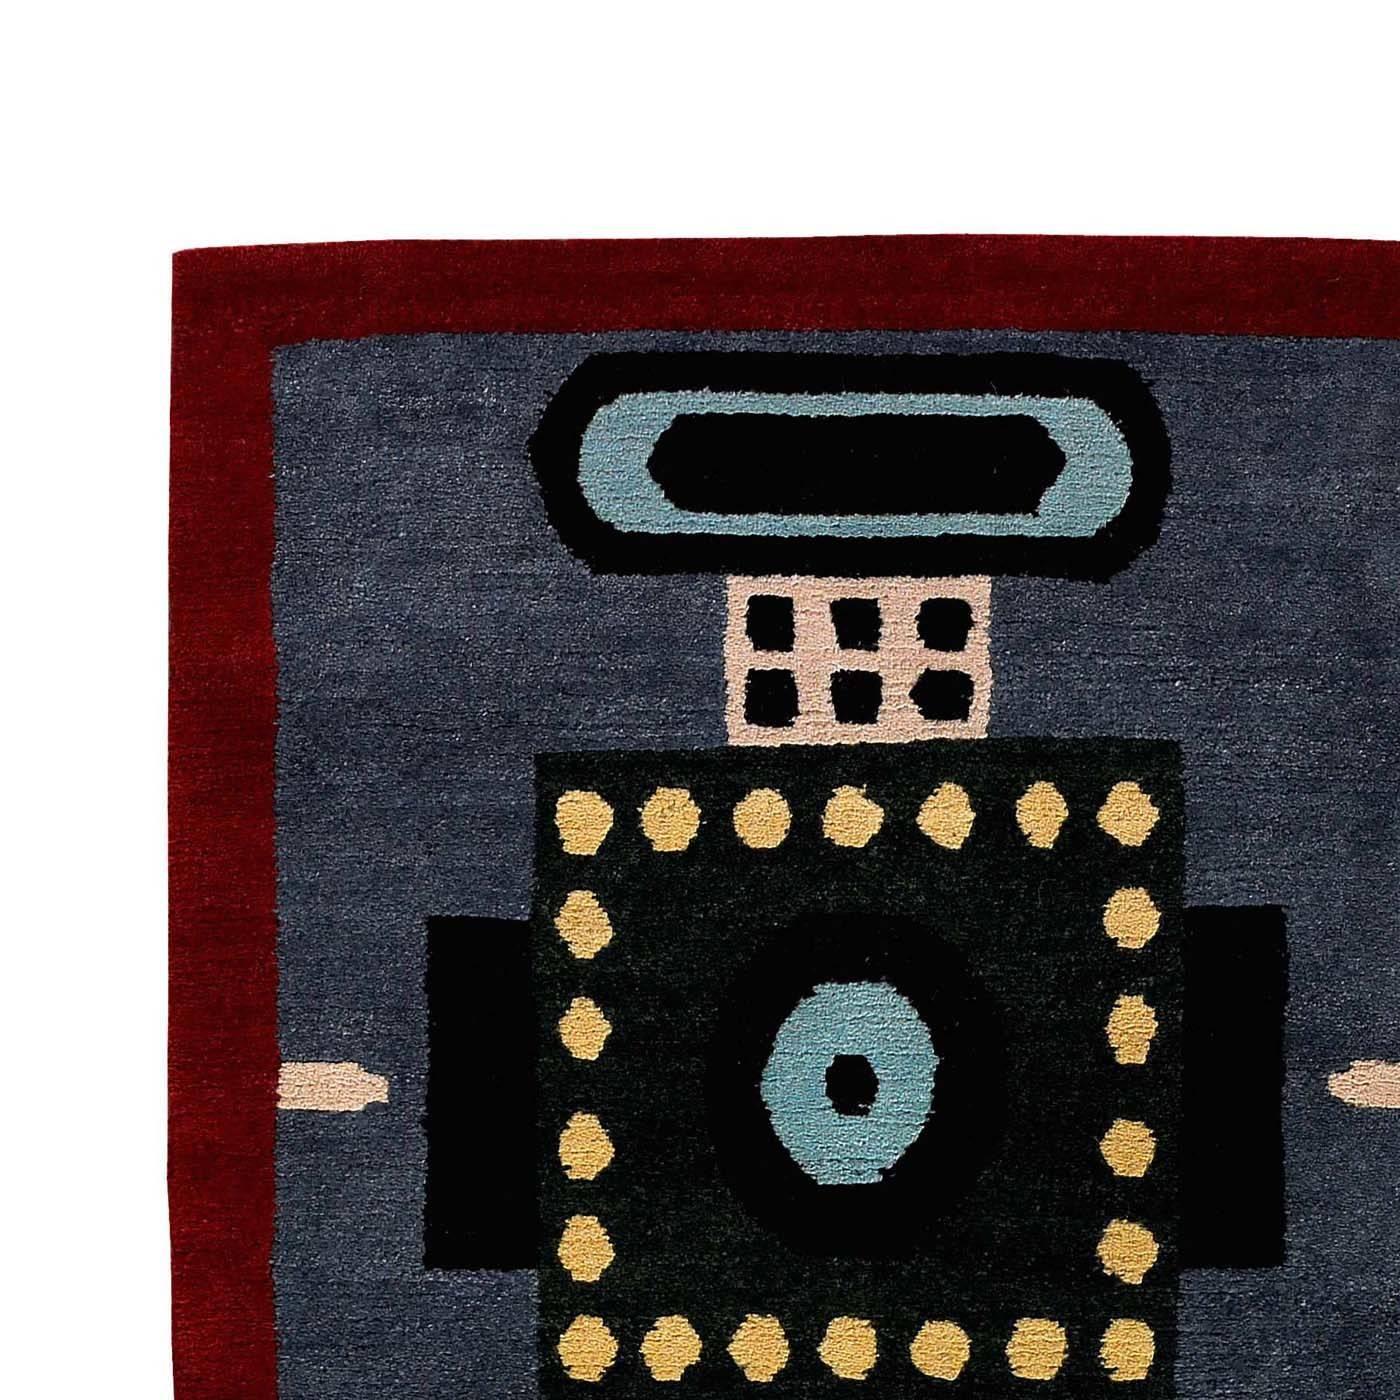 This striking carpet is part of a limited 36-piece series that was designed by Nathalie du Pasquier and executed entirely by hand in every step of its production by skilled Nepalese artisans using traditional Tibetan methods and Tibetan wool, which